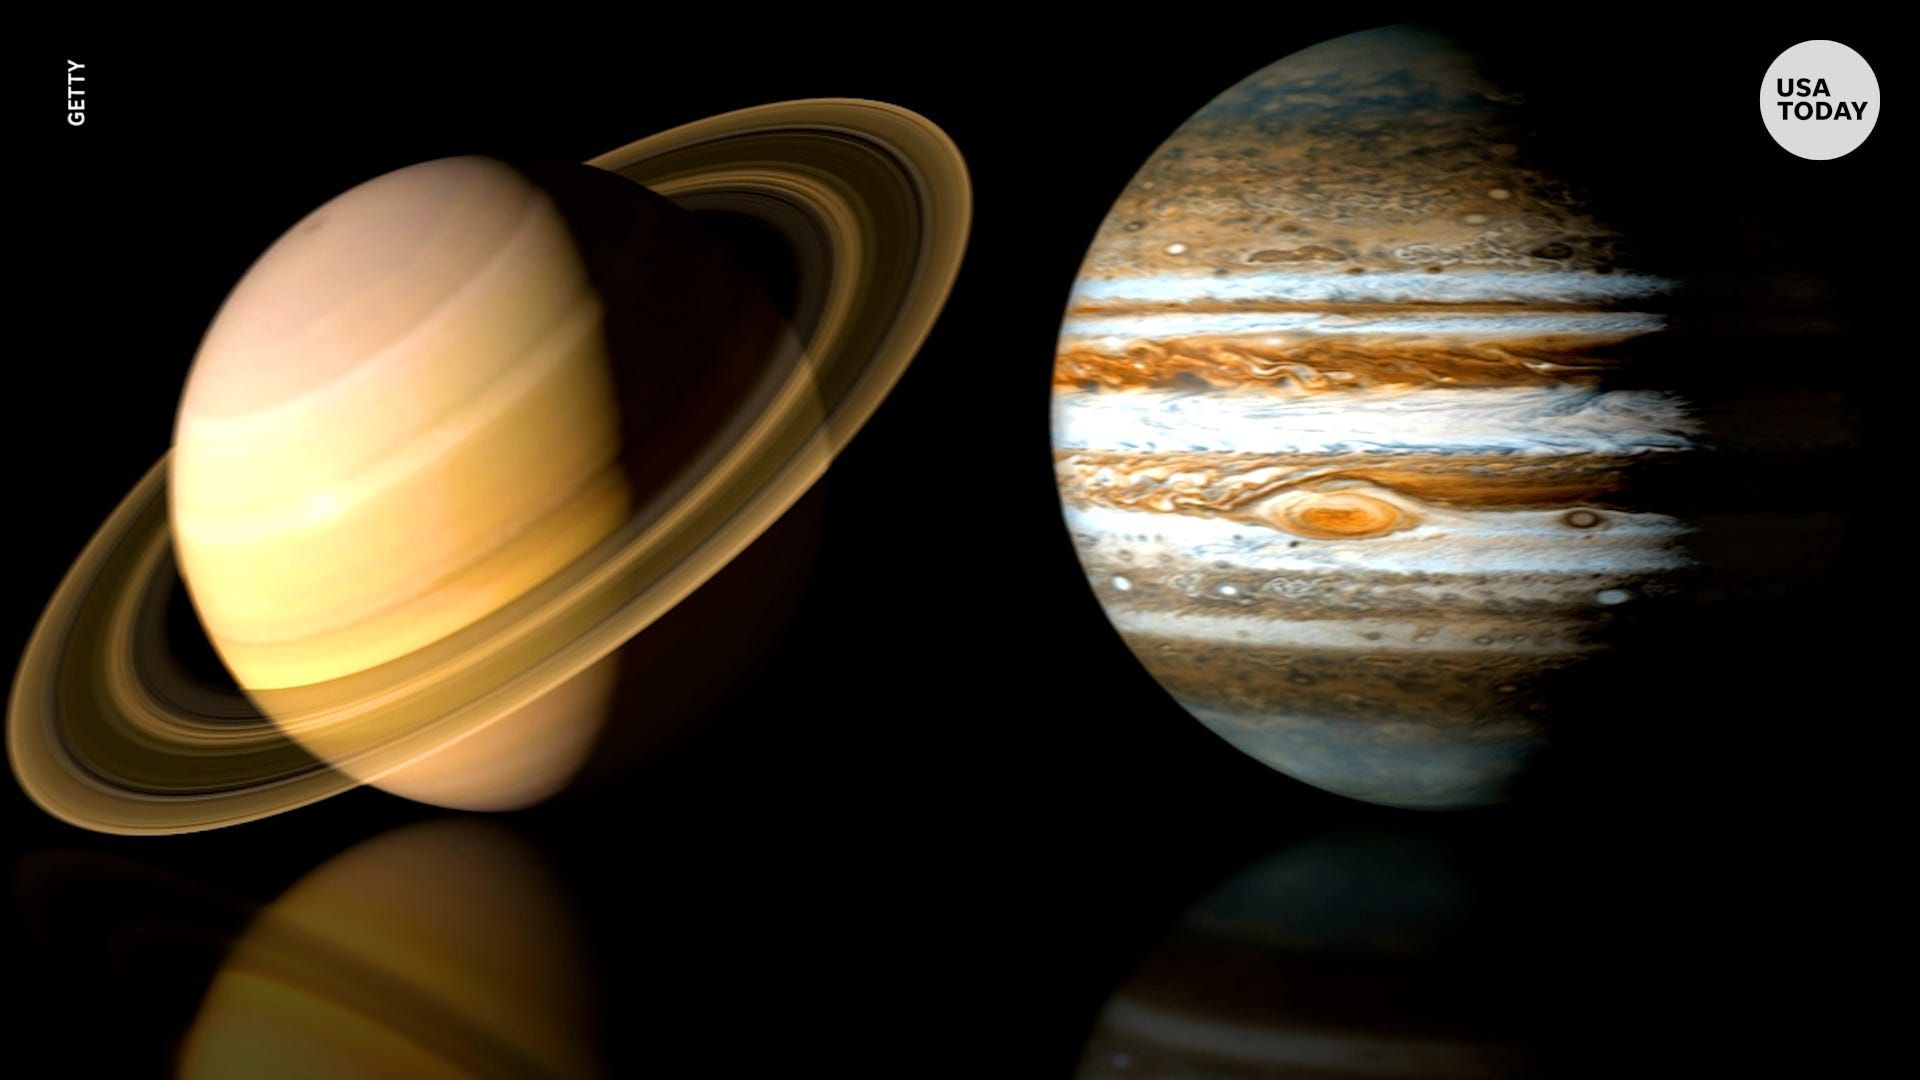 Images of Saturn and Jupiter are real, taken from the Massachusetts Telescope